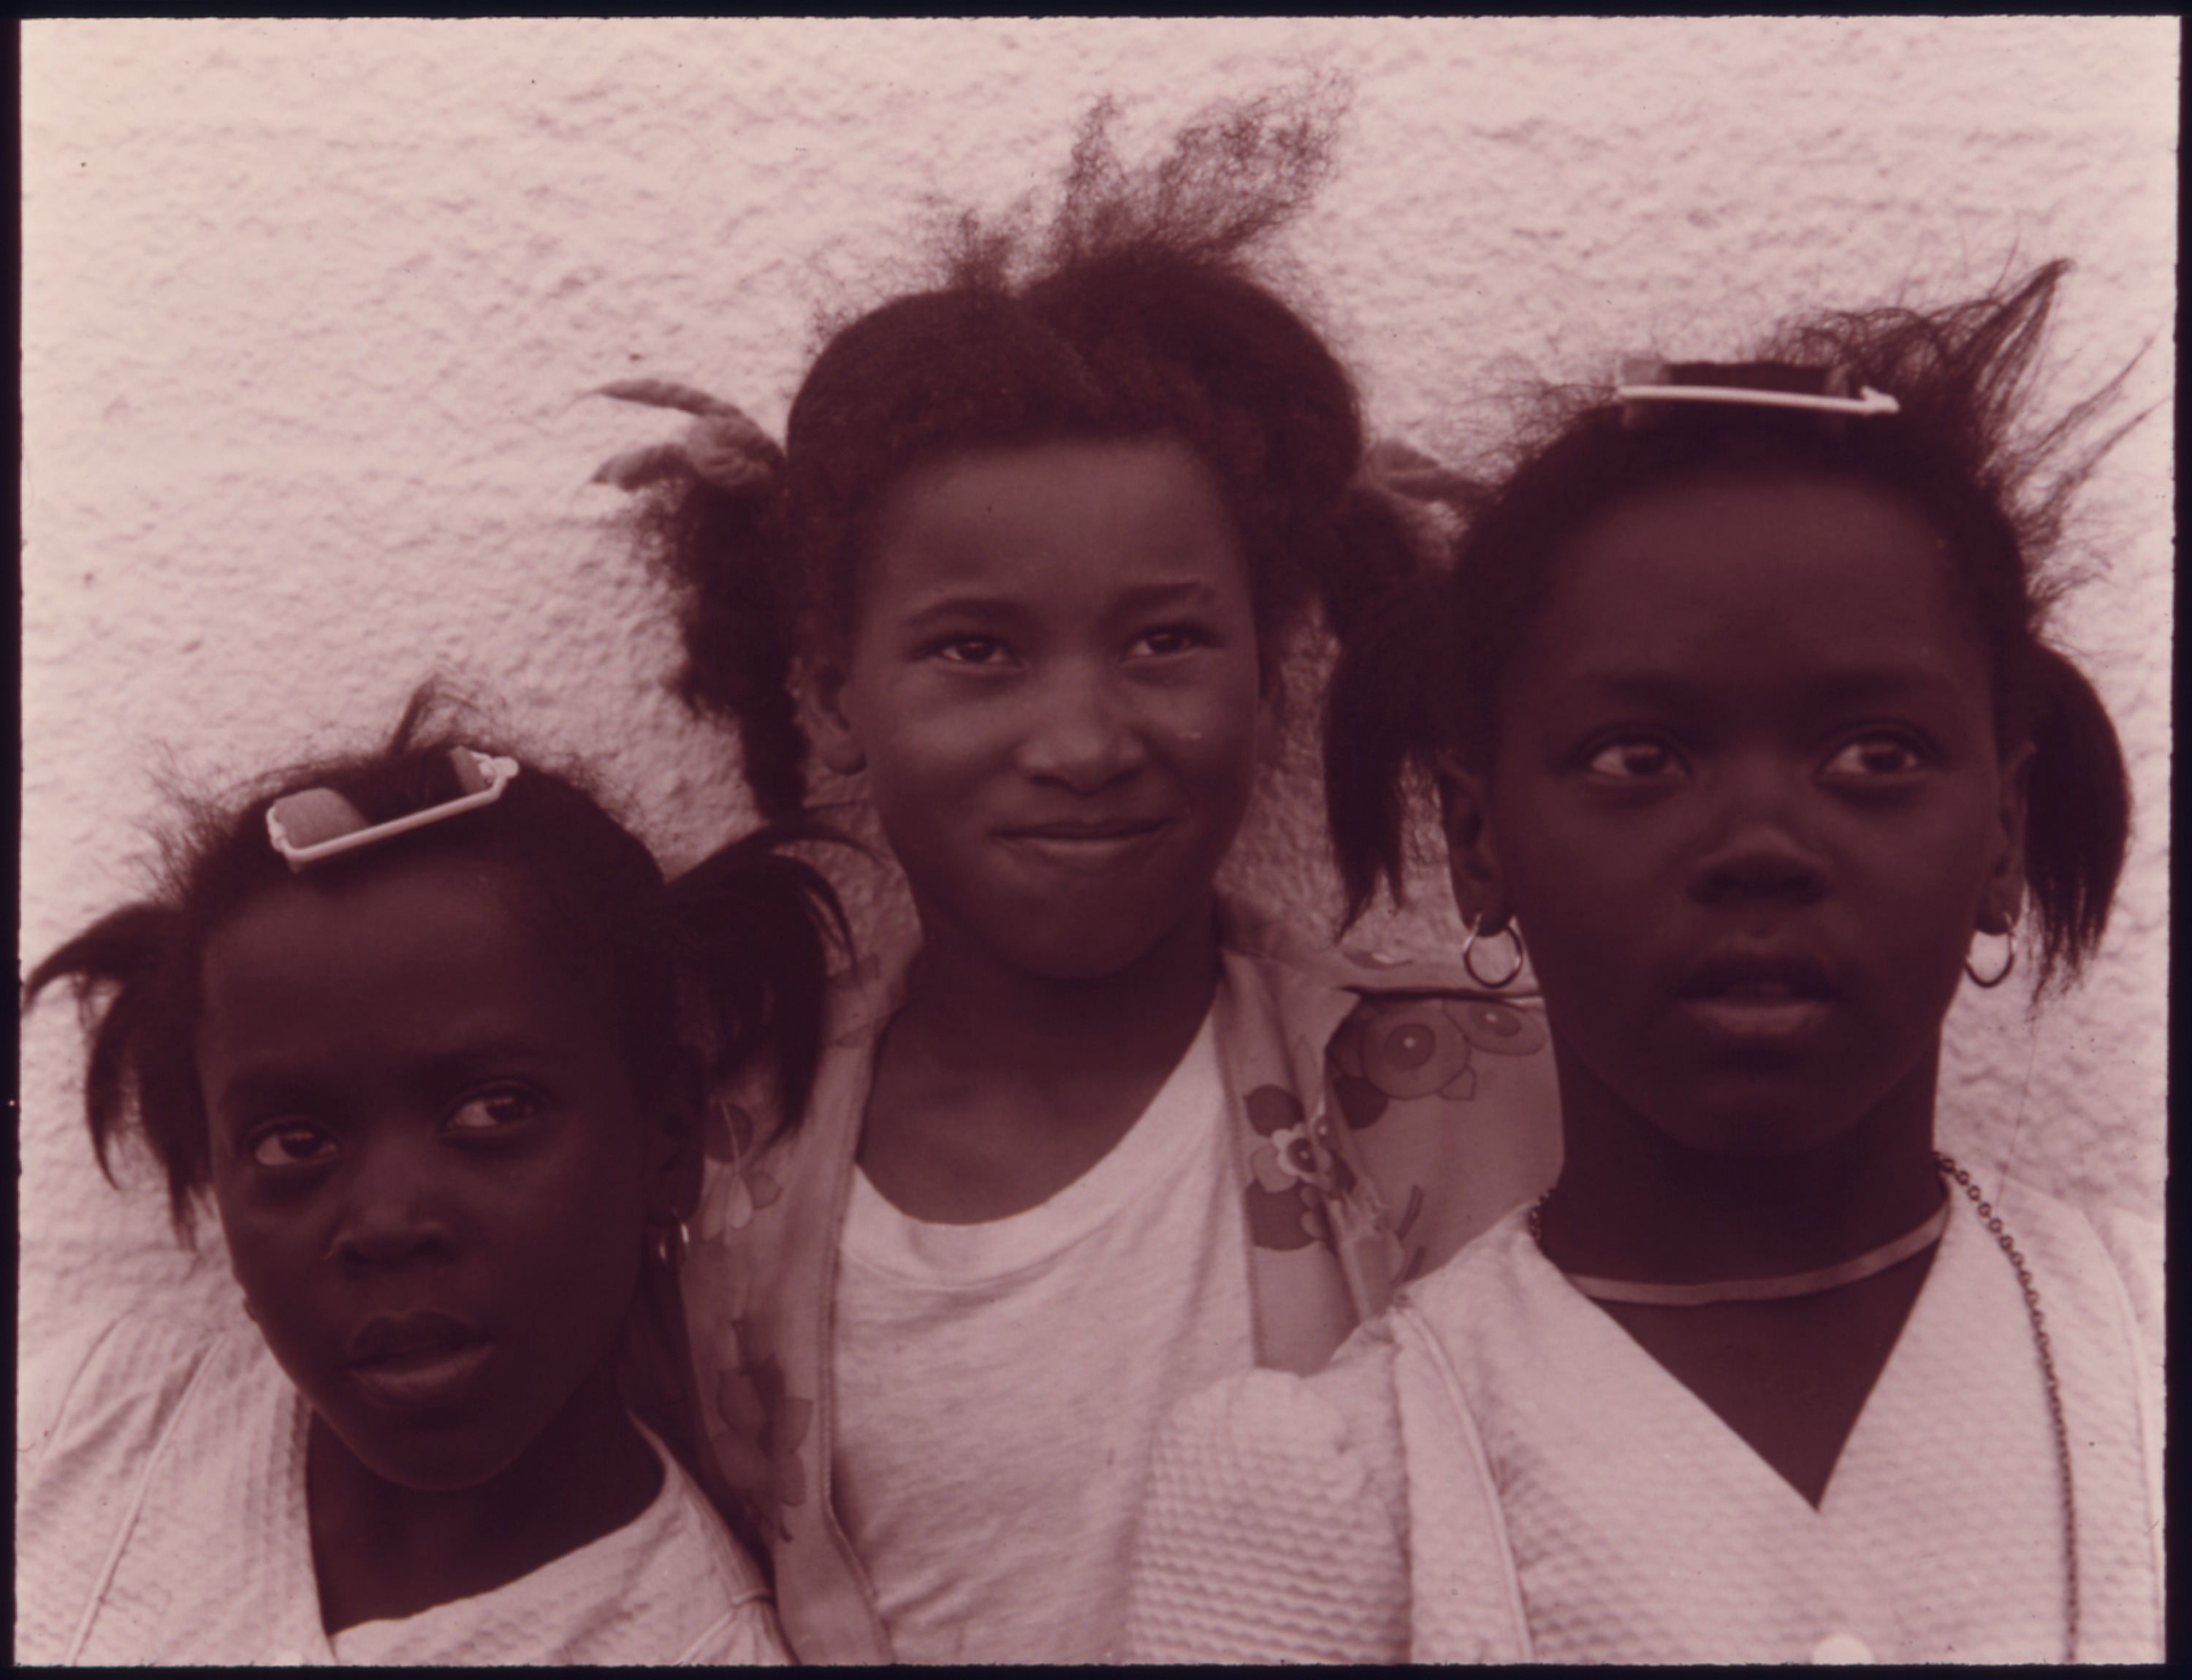 THREE GIRLS IN GALVESTON, TEXAS. THIS IS ONE OF A SERIES OF 21 BLACK AND WHITE PHOTOGRAPHS. THEY DOCUMENT THE... - NARA - 557639